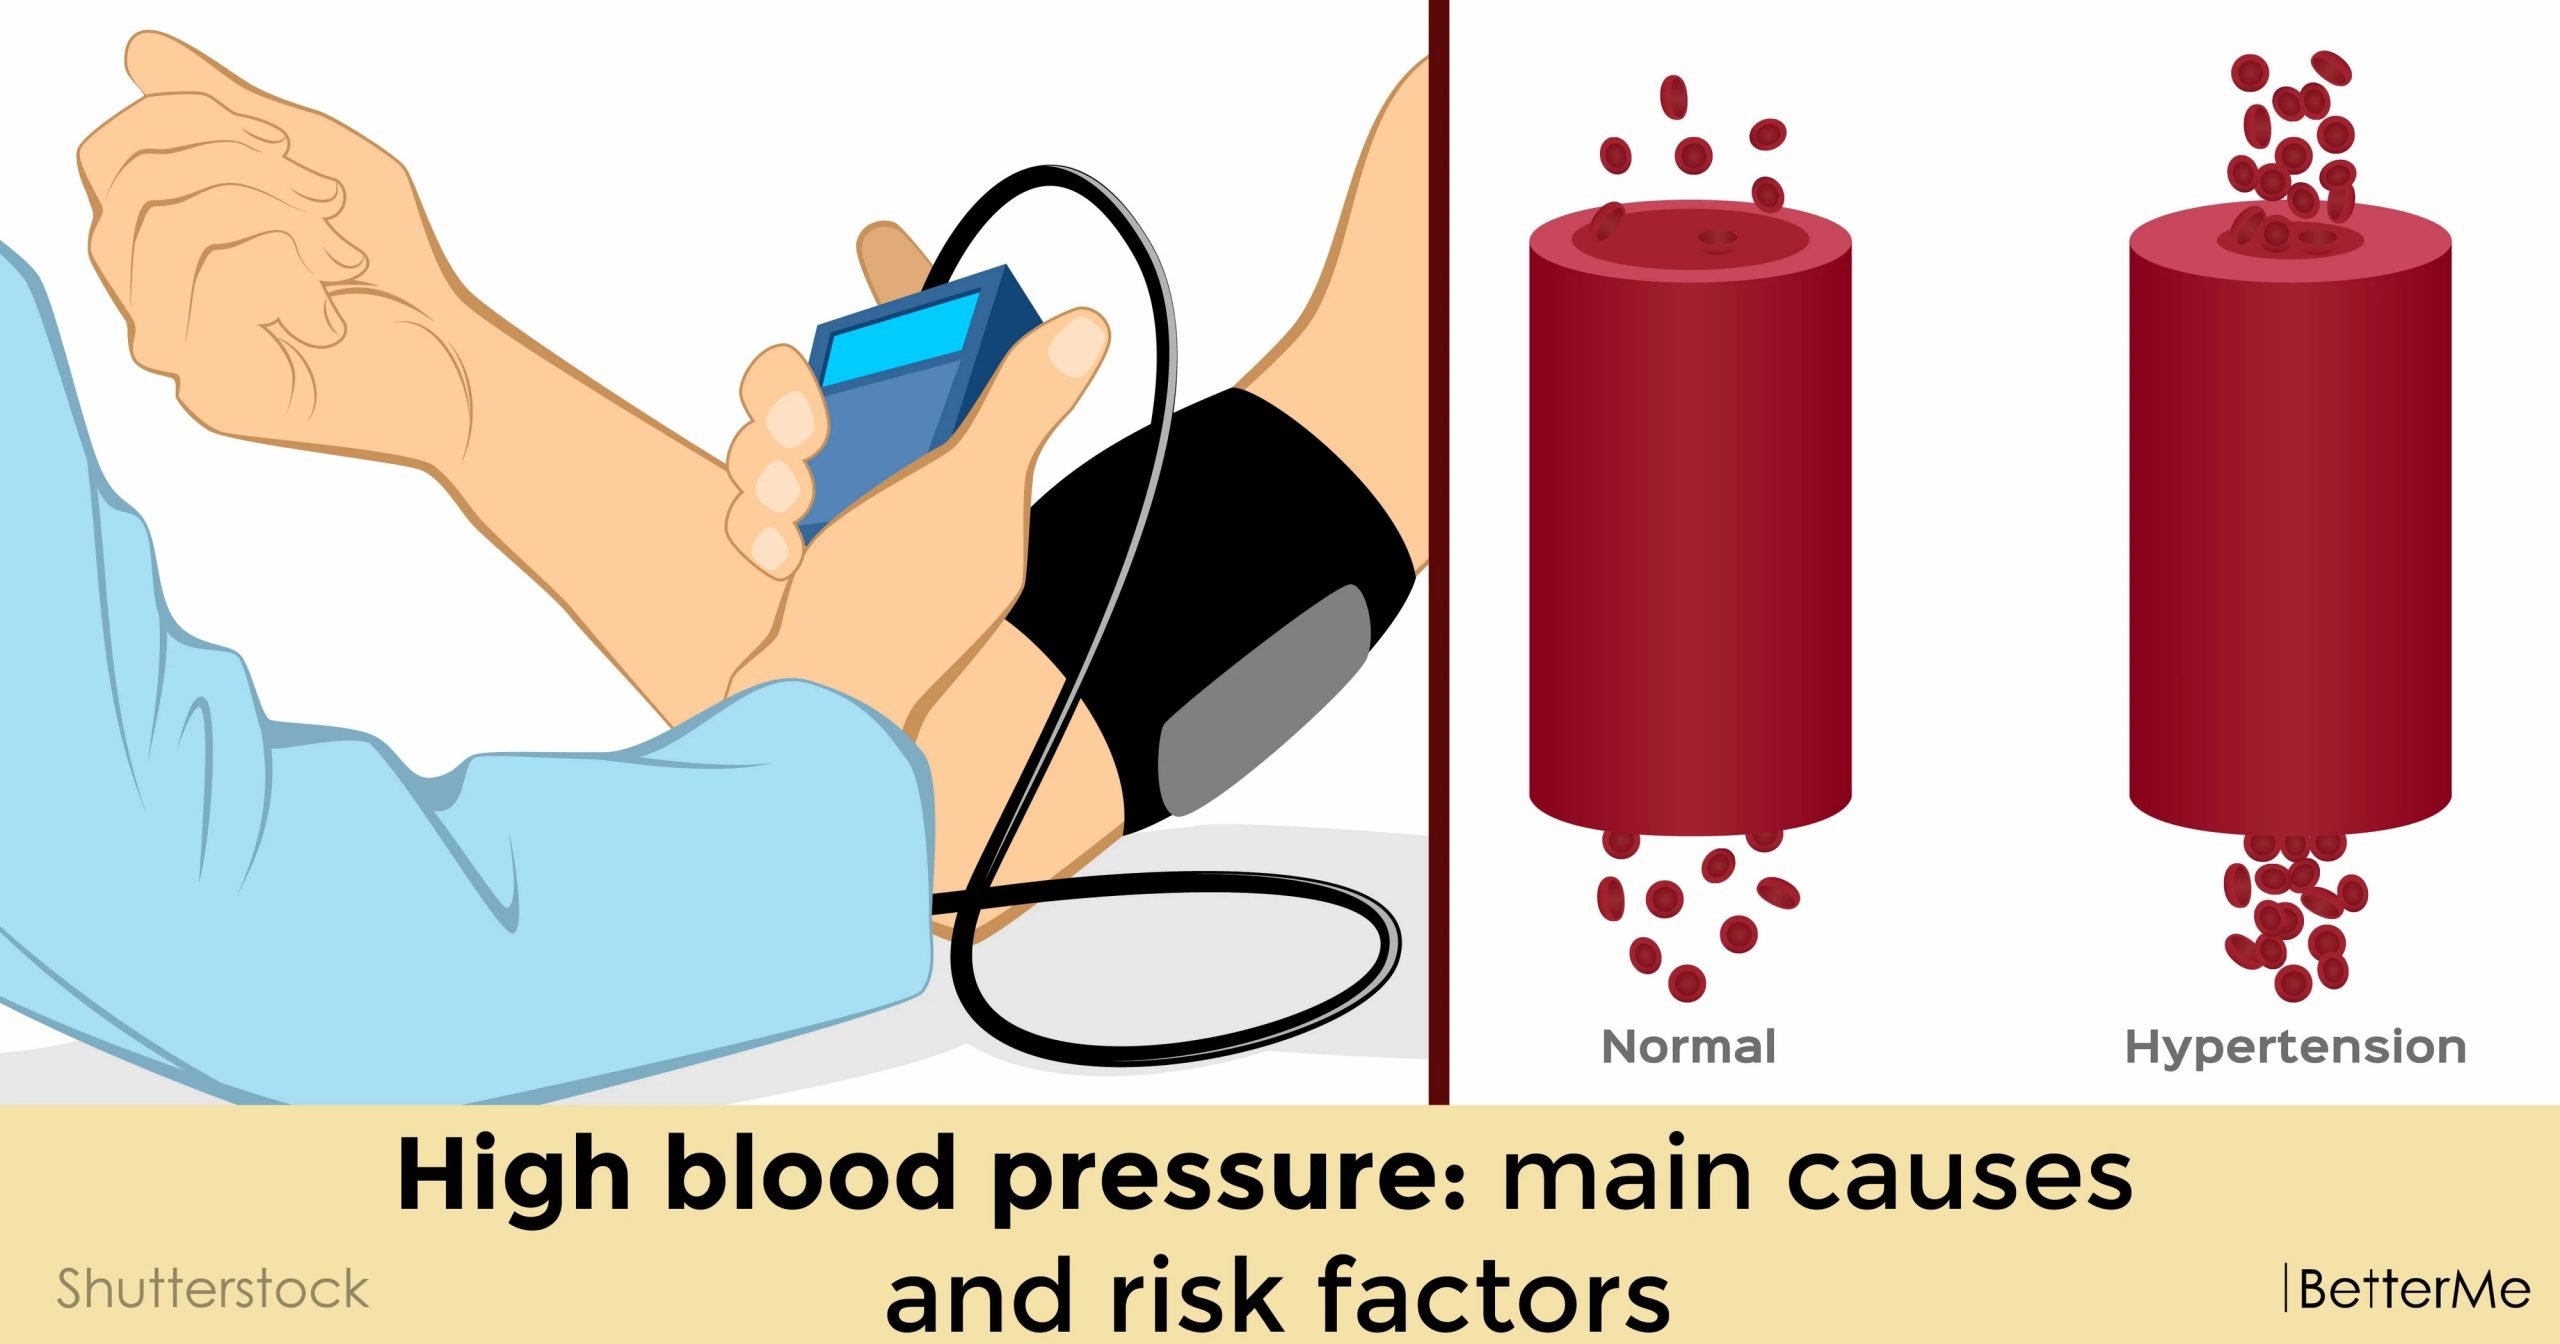 High blood pressure: main causes and risk factors